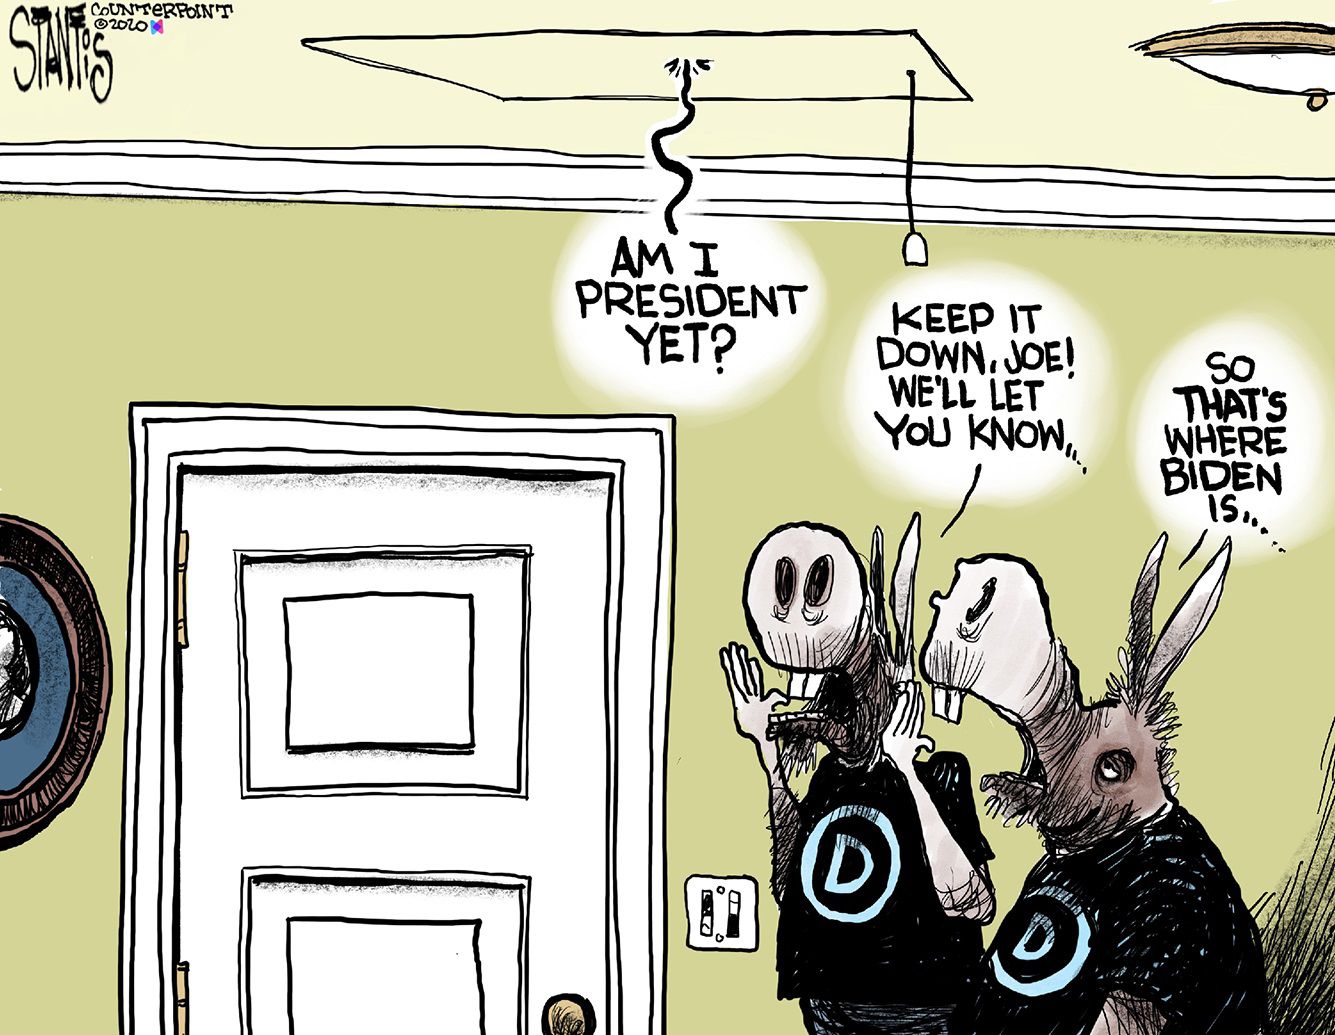 Editorial cartoons for April 5, 2020: 'We can do it' 